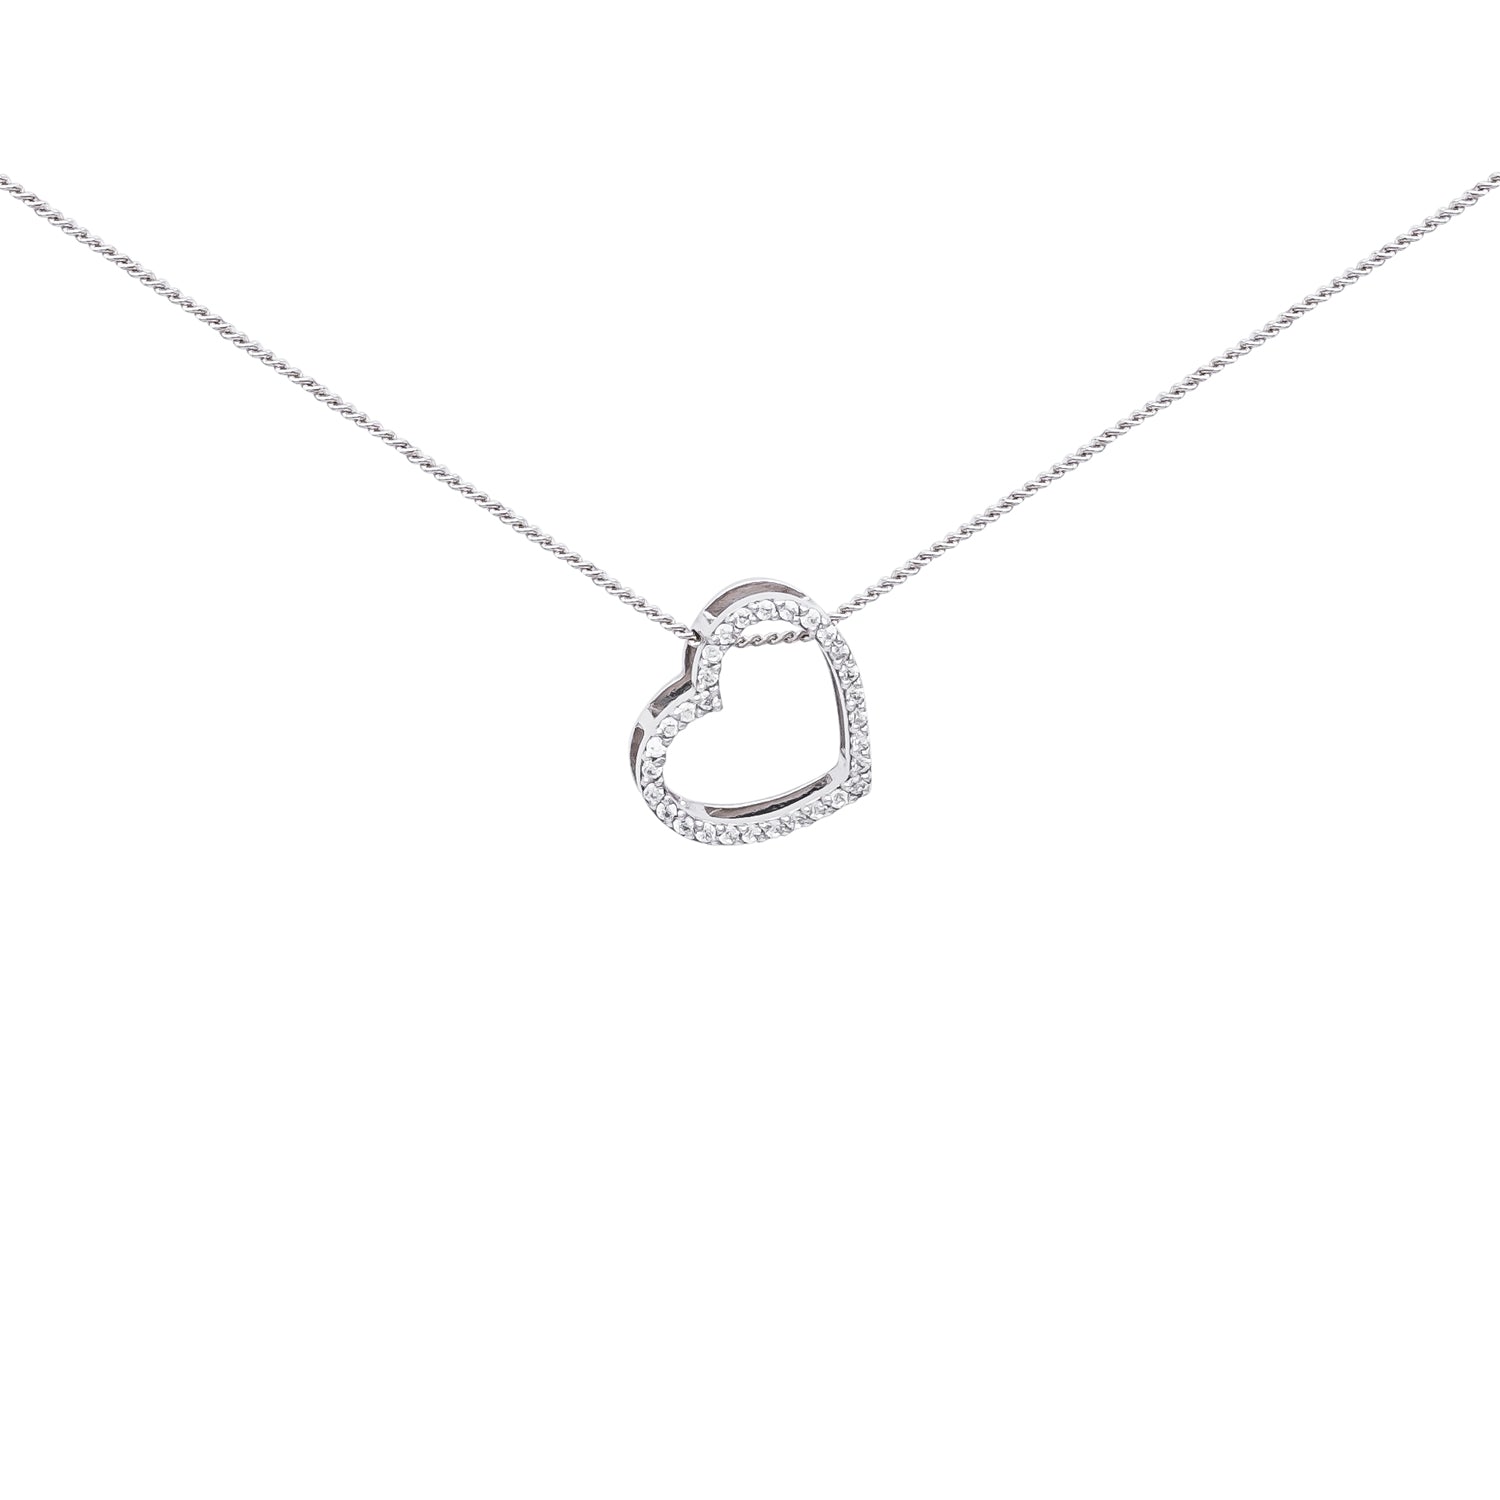 Shining Heart necklace, silver color